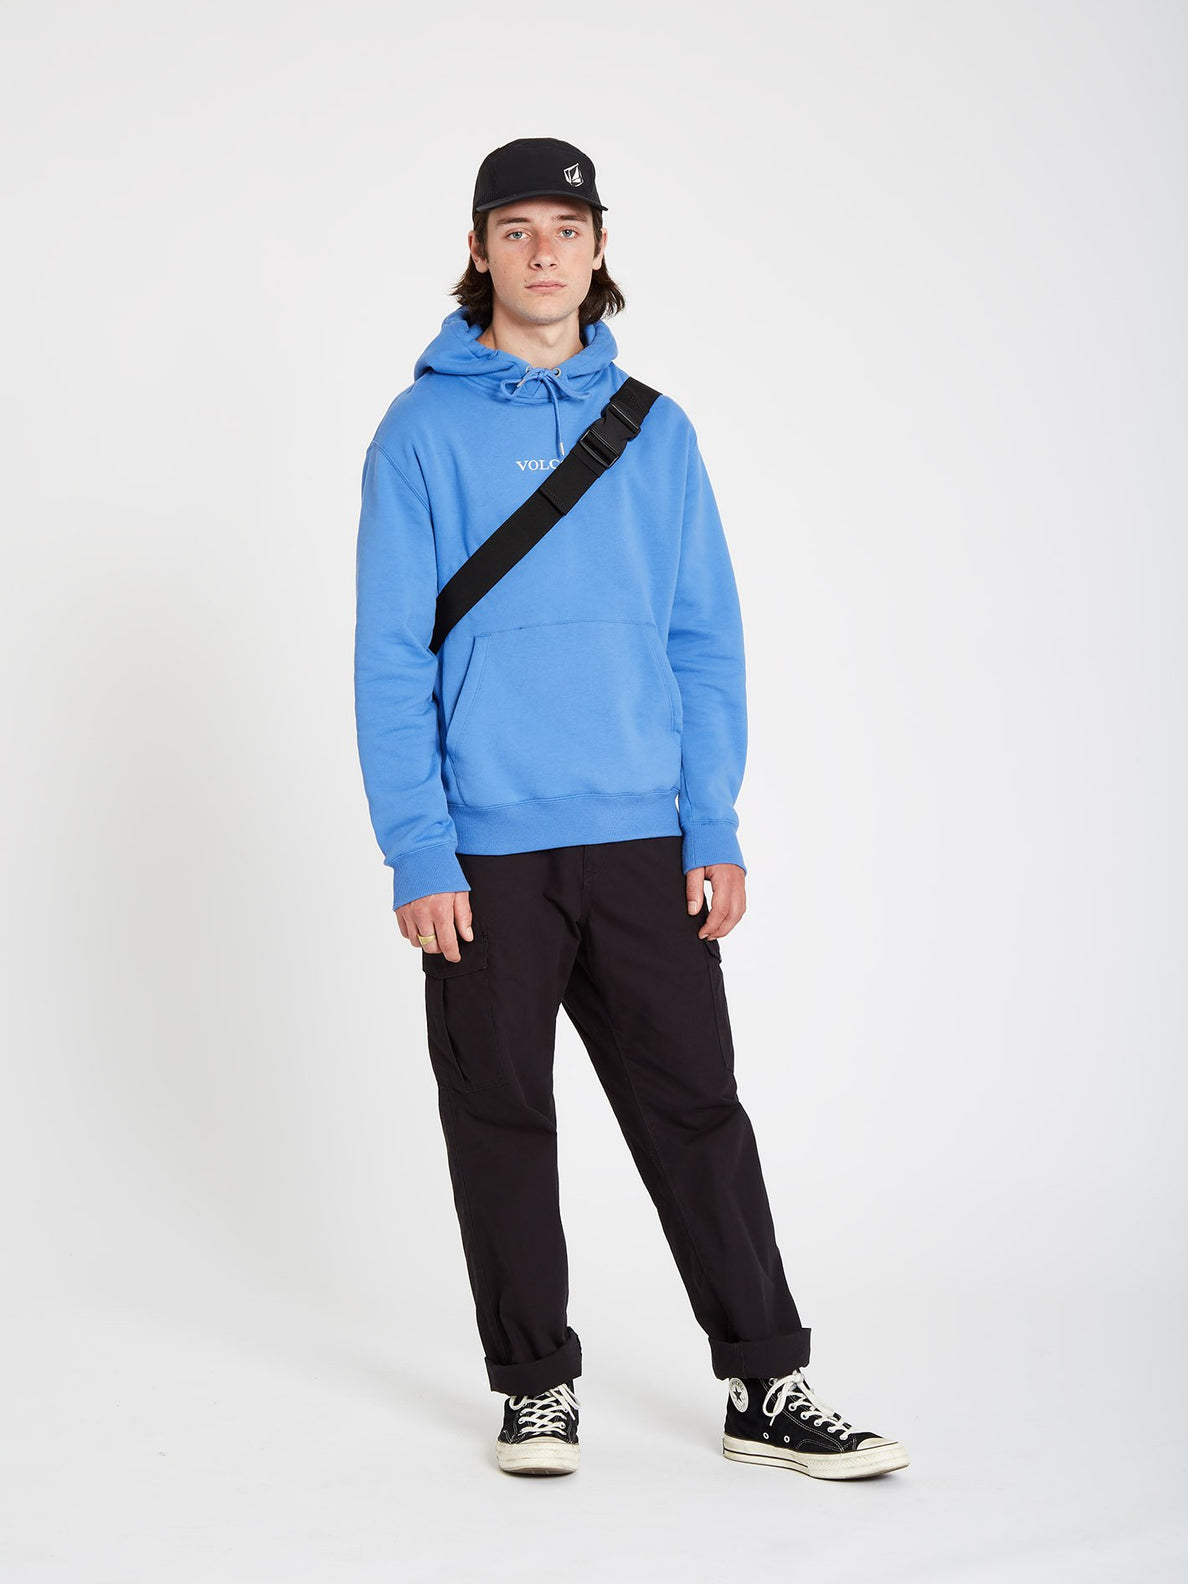 Miter Iii Cargo Pant - Black (A1112105_BLK) [21]